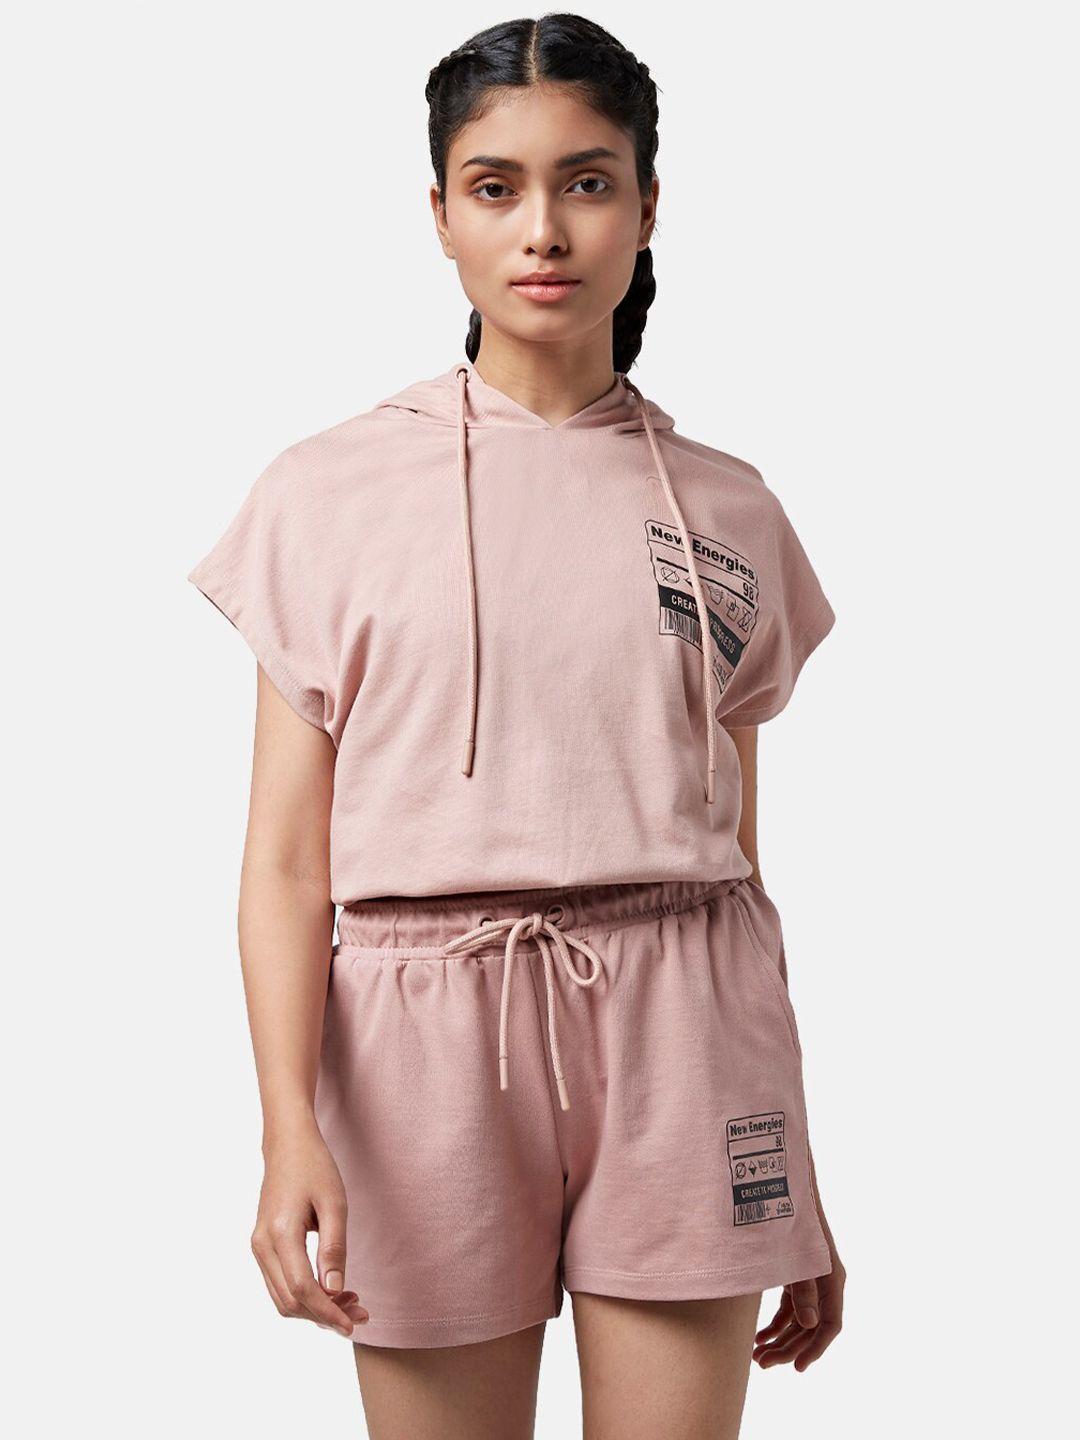 ajile-by-pantaloons-hooded-cotton-t-shirt